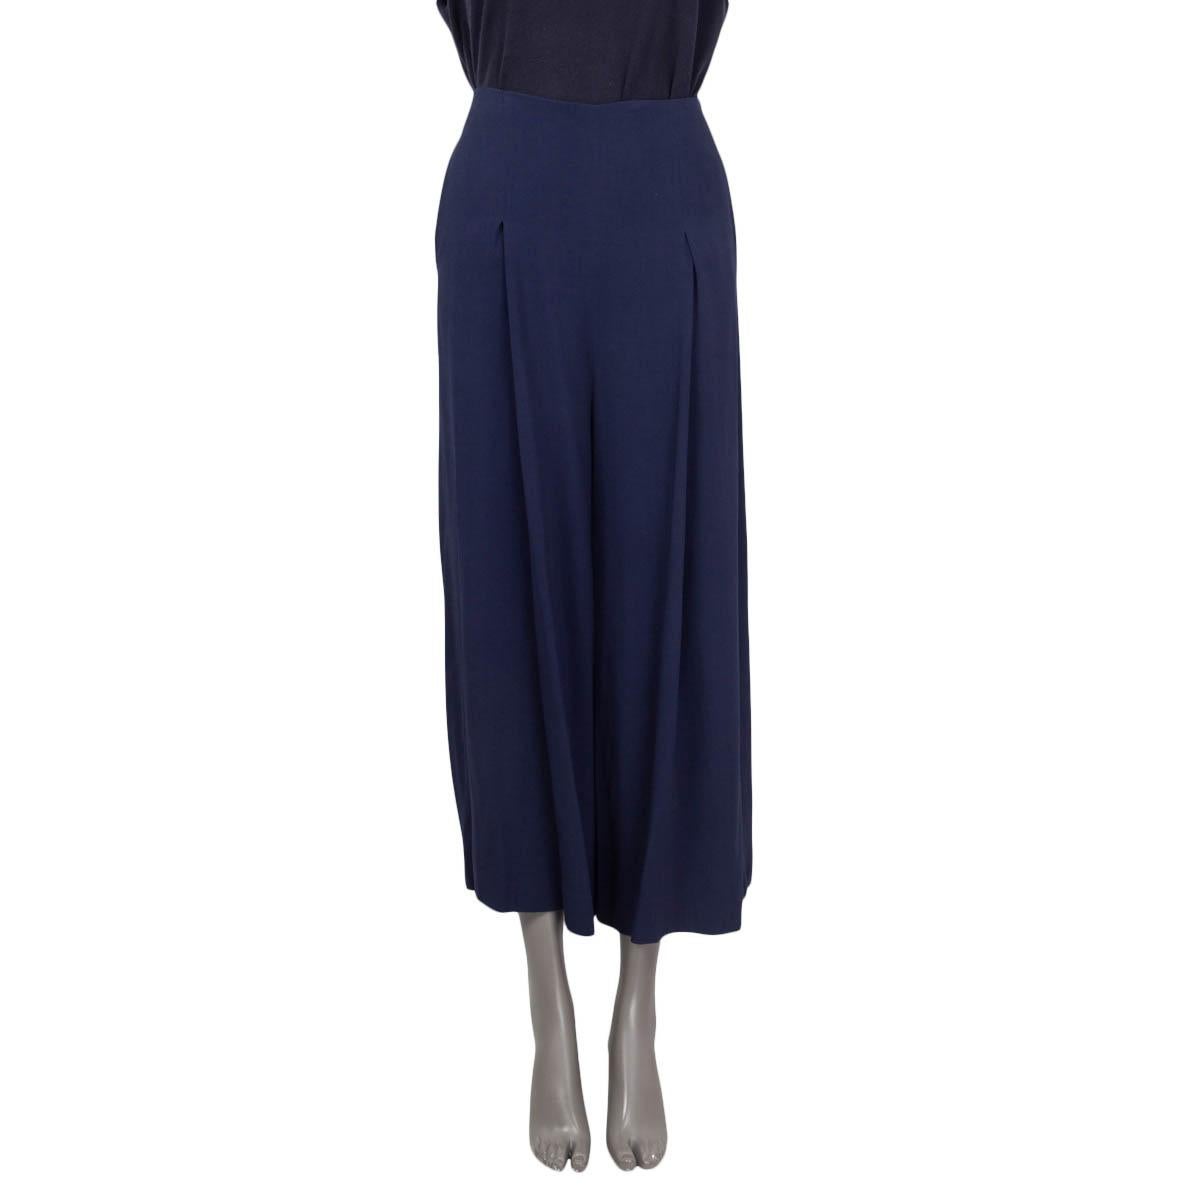 100% authentic The Row culotte pants in navy blue viscose (95%) and elastane (5%). Features two slit pockets on the side. Opens with a concealed zipper and a hook at the side. Unlined. Have been worn and are in excellent condition.